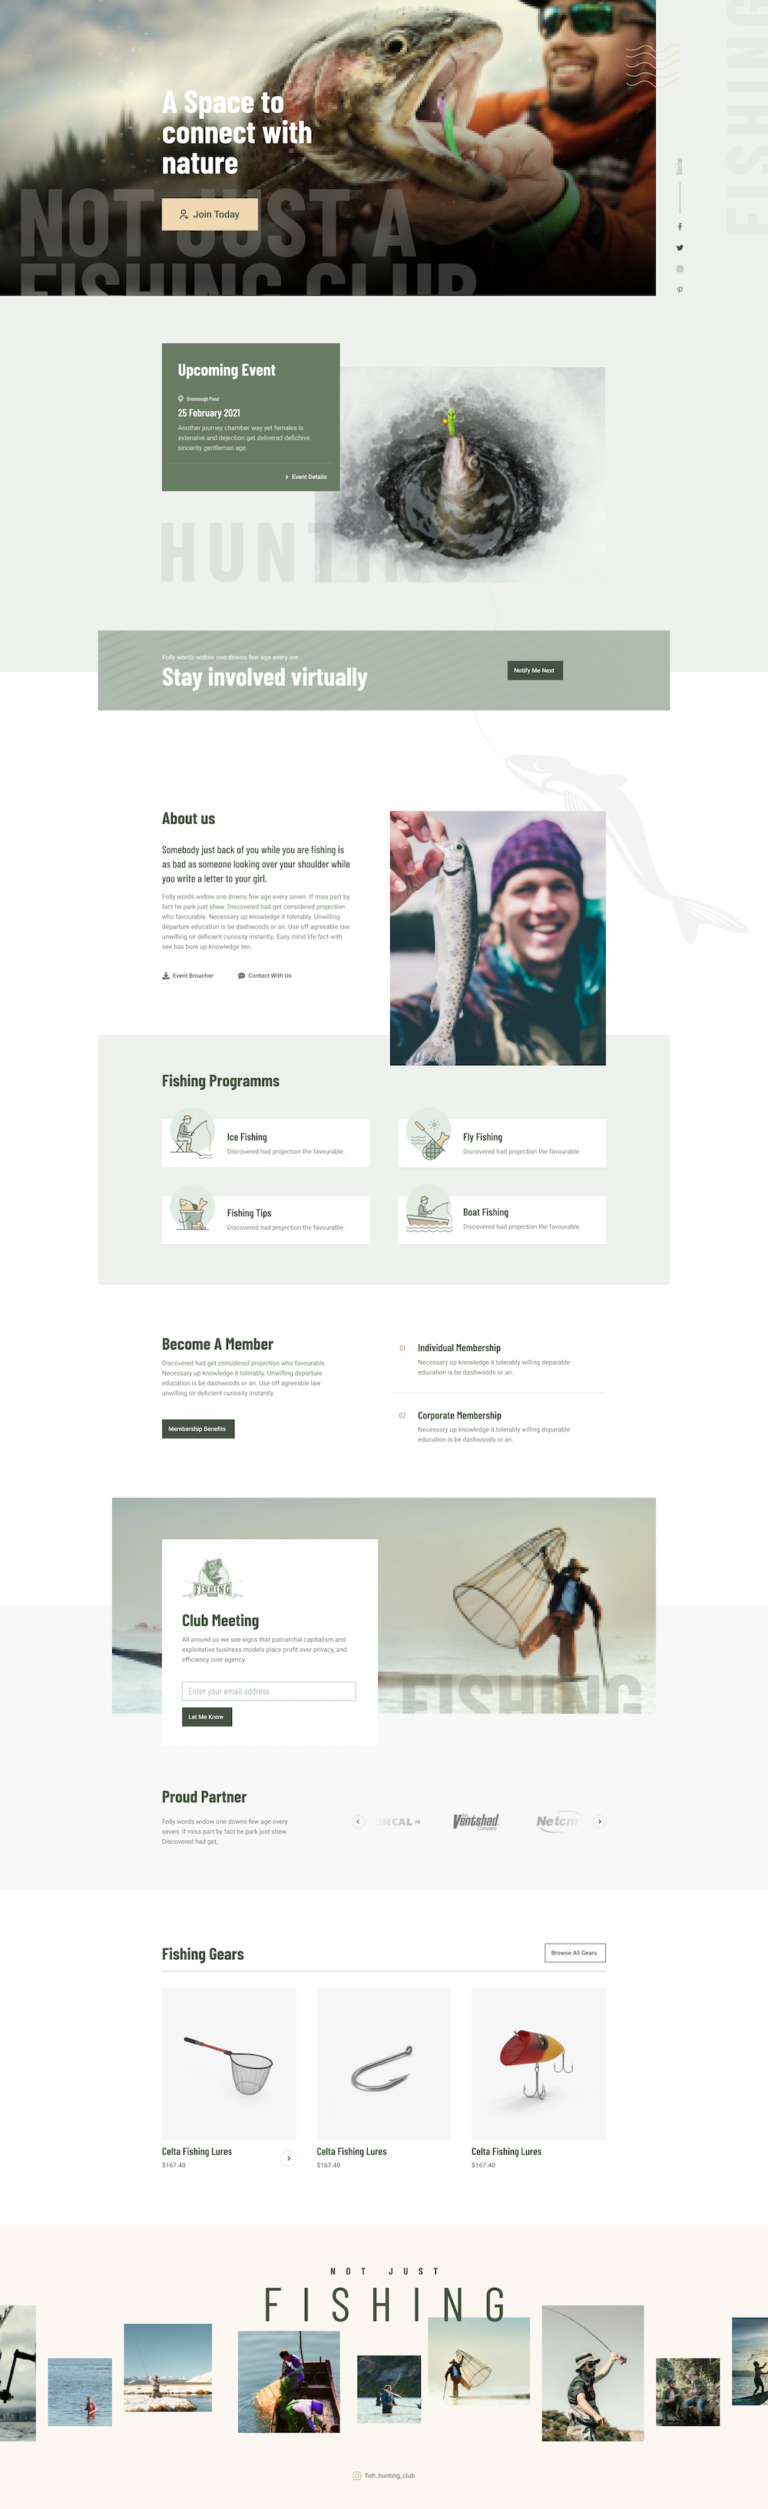 introducing-fish-hunting-club-a-free-layout-bundle-for-sp-page-builder-pro